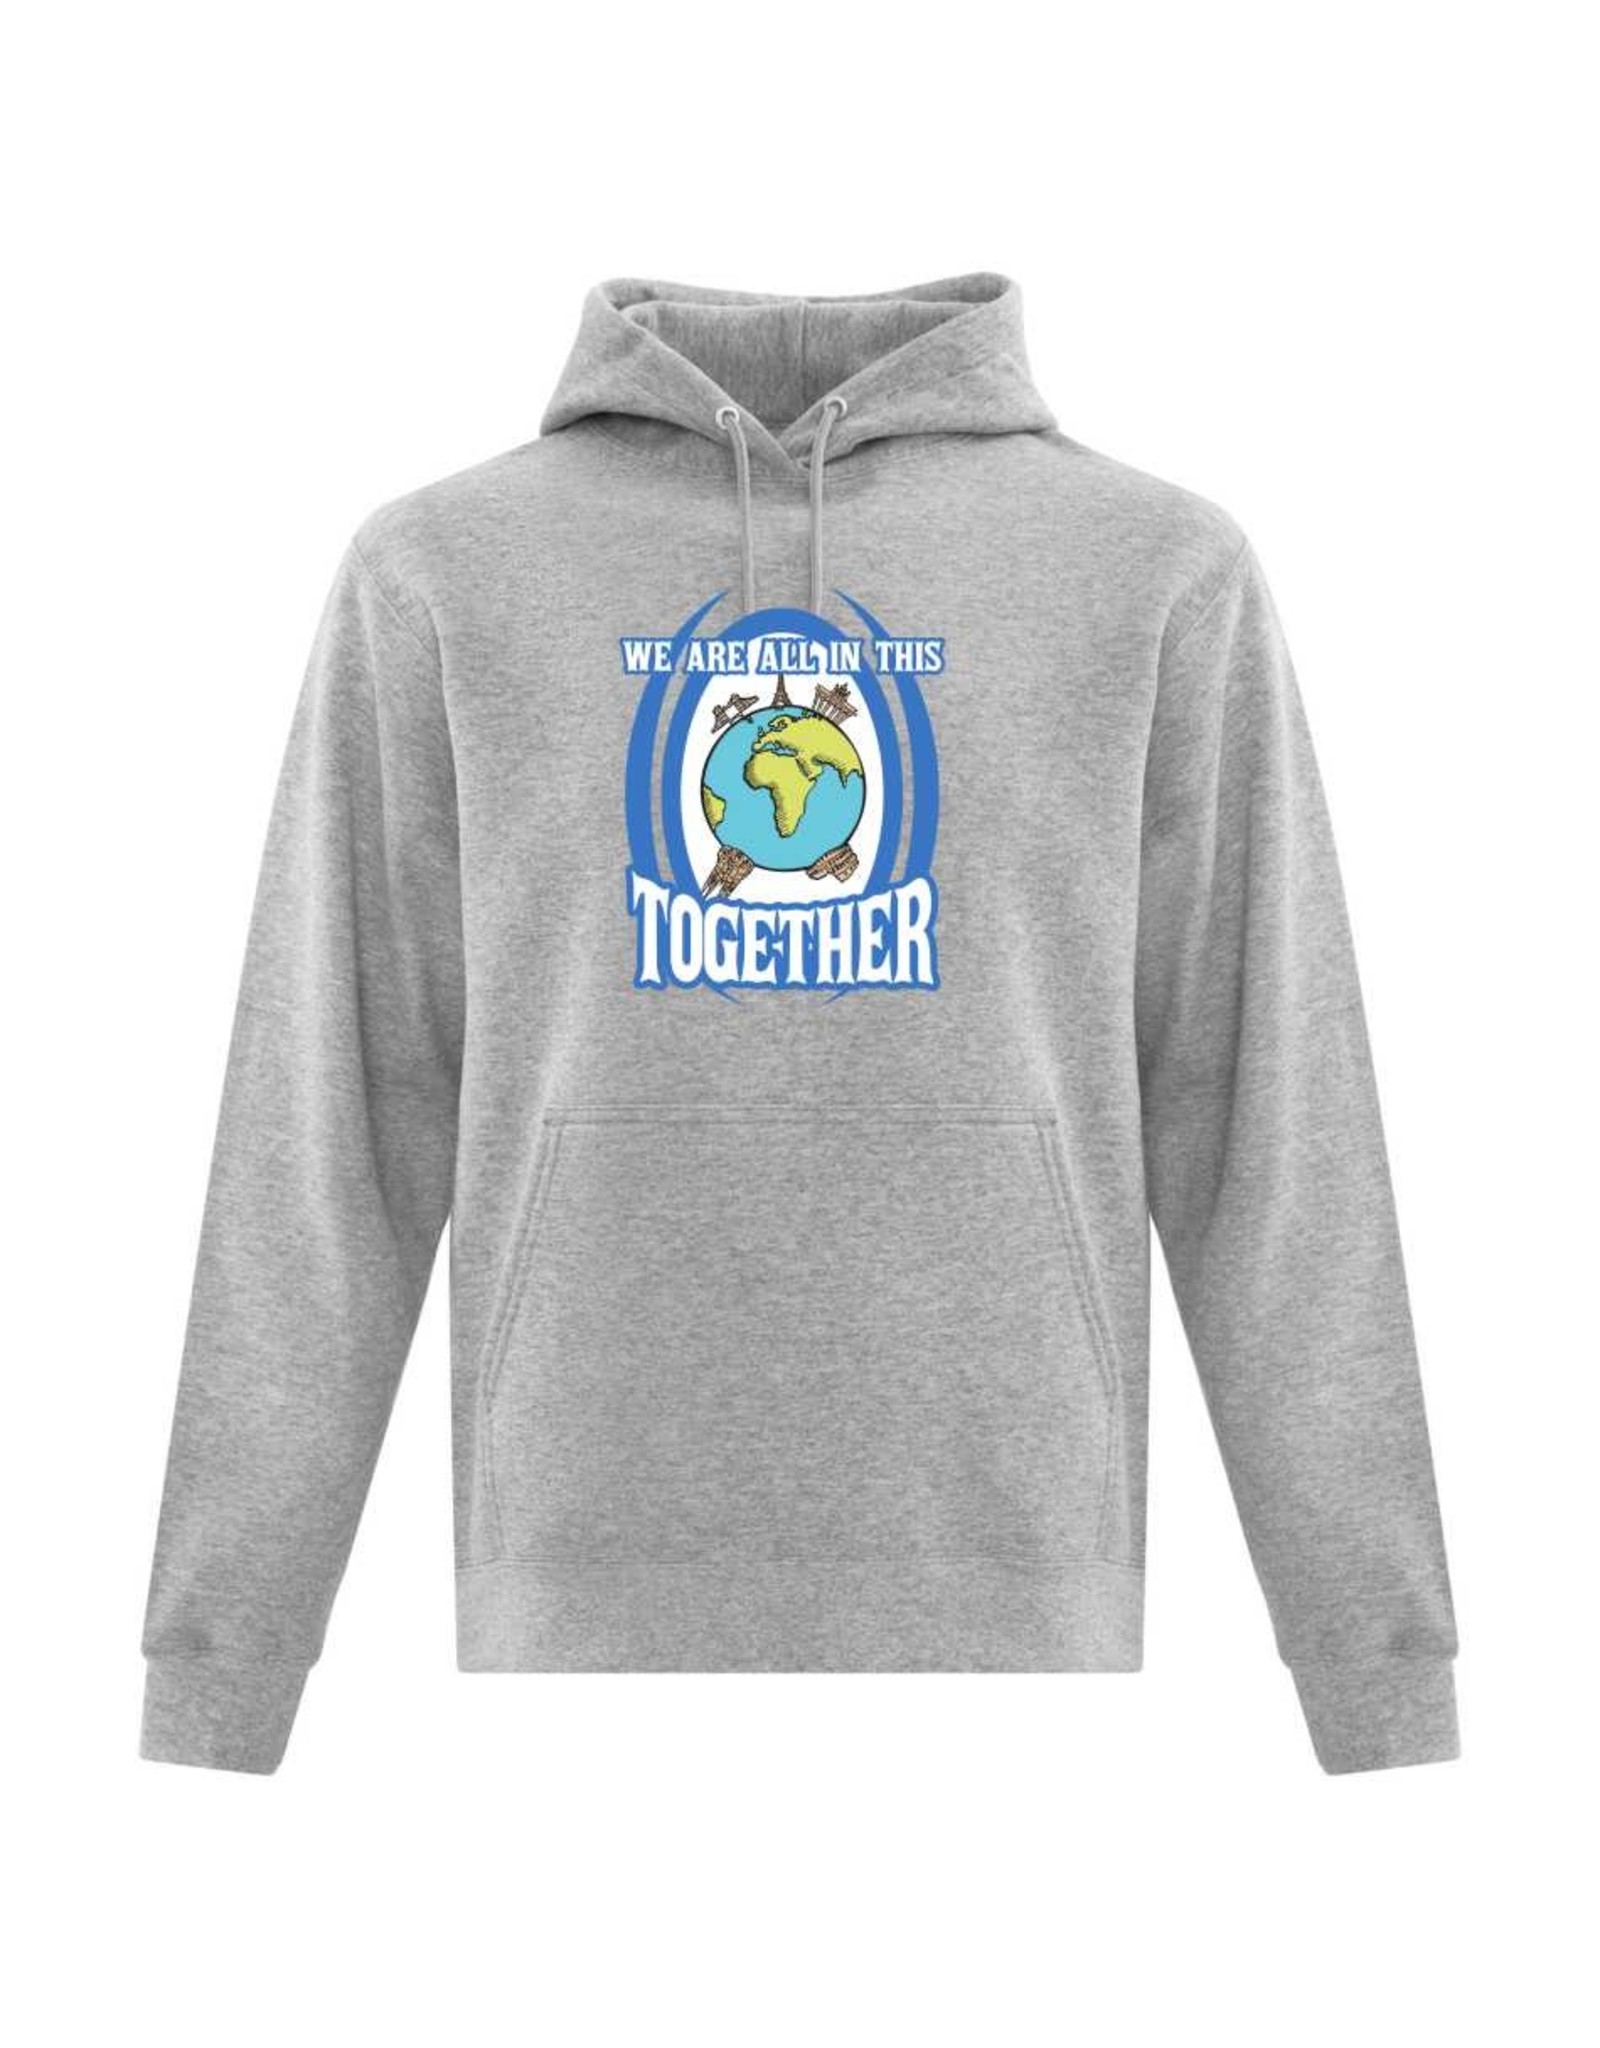 We are all in this together Hoodie